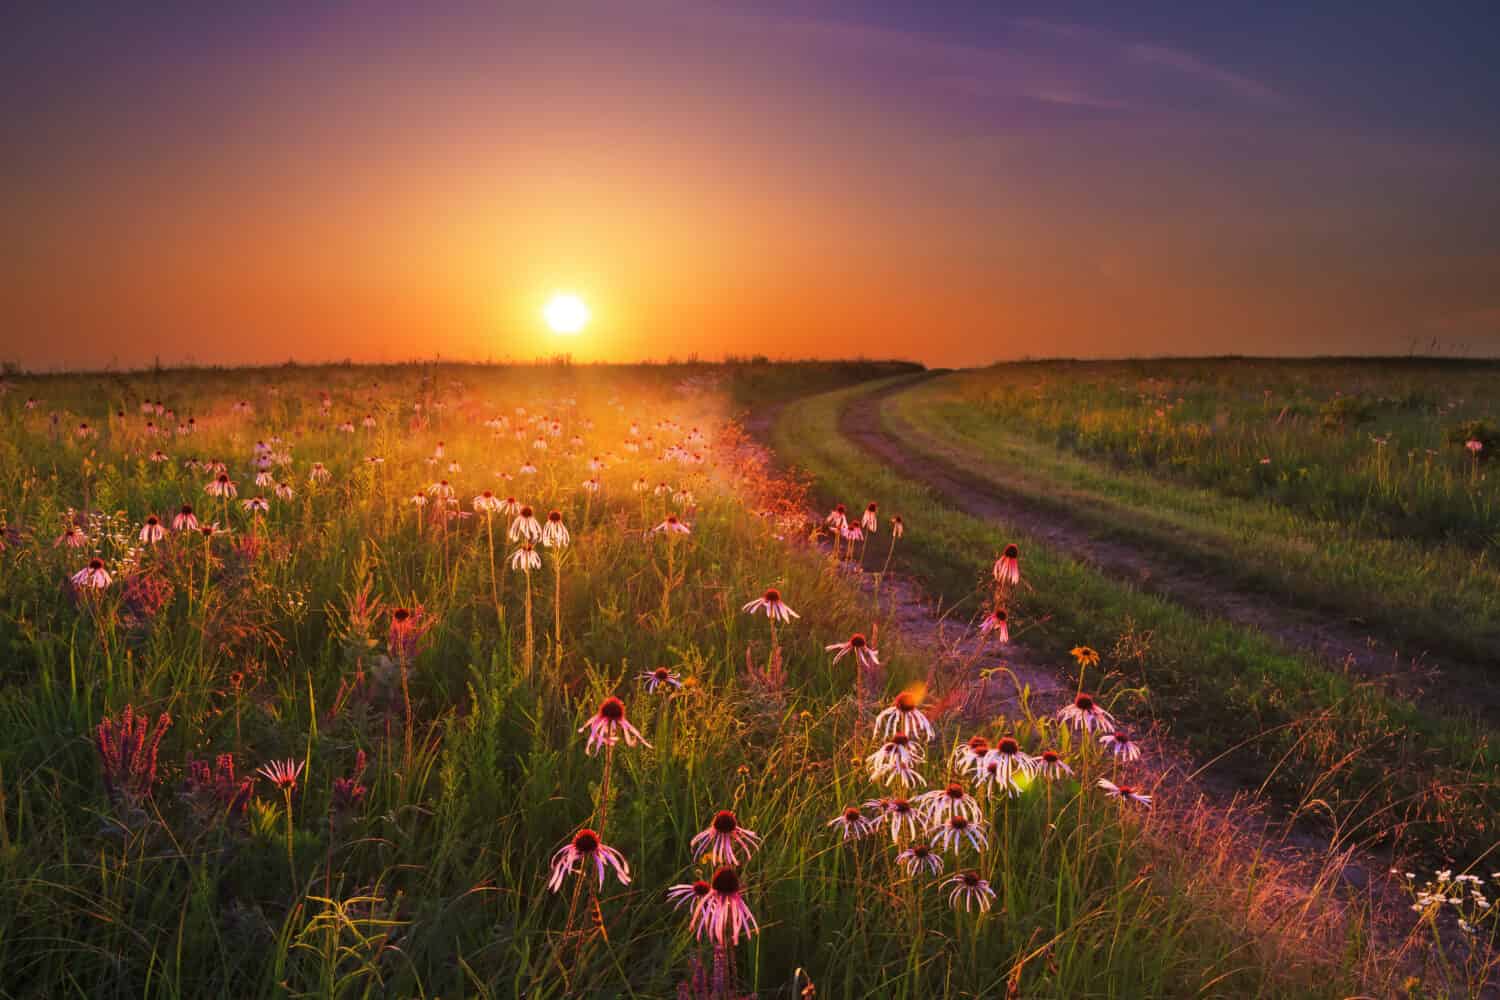 Sunset on the Wah'Kon-Tah Prairie in Missouri with various types of coneflowers and other wildflowers glowing in the sunlight.